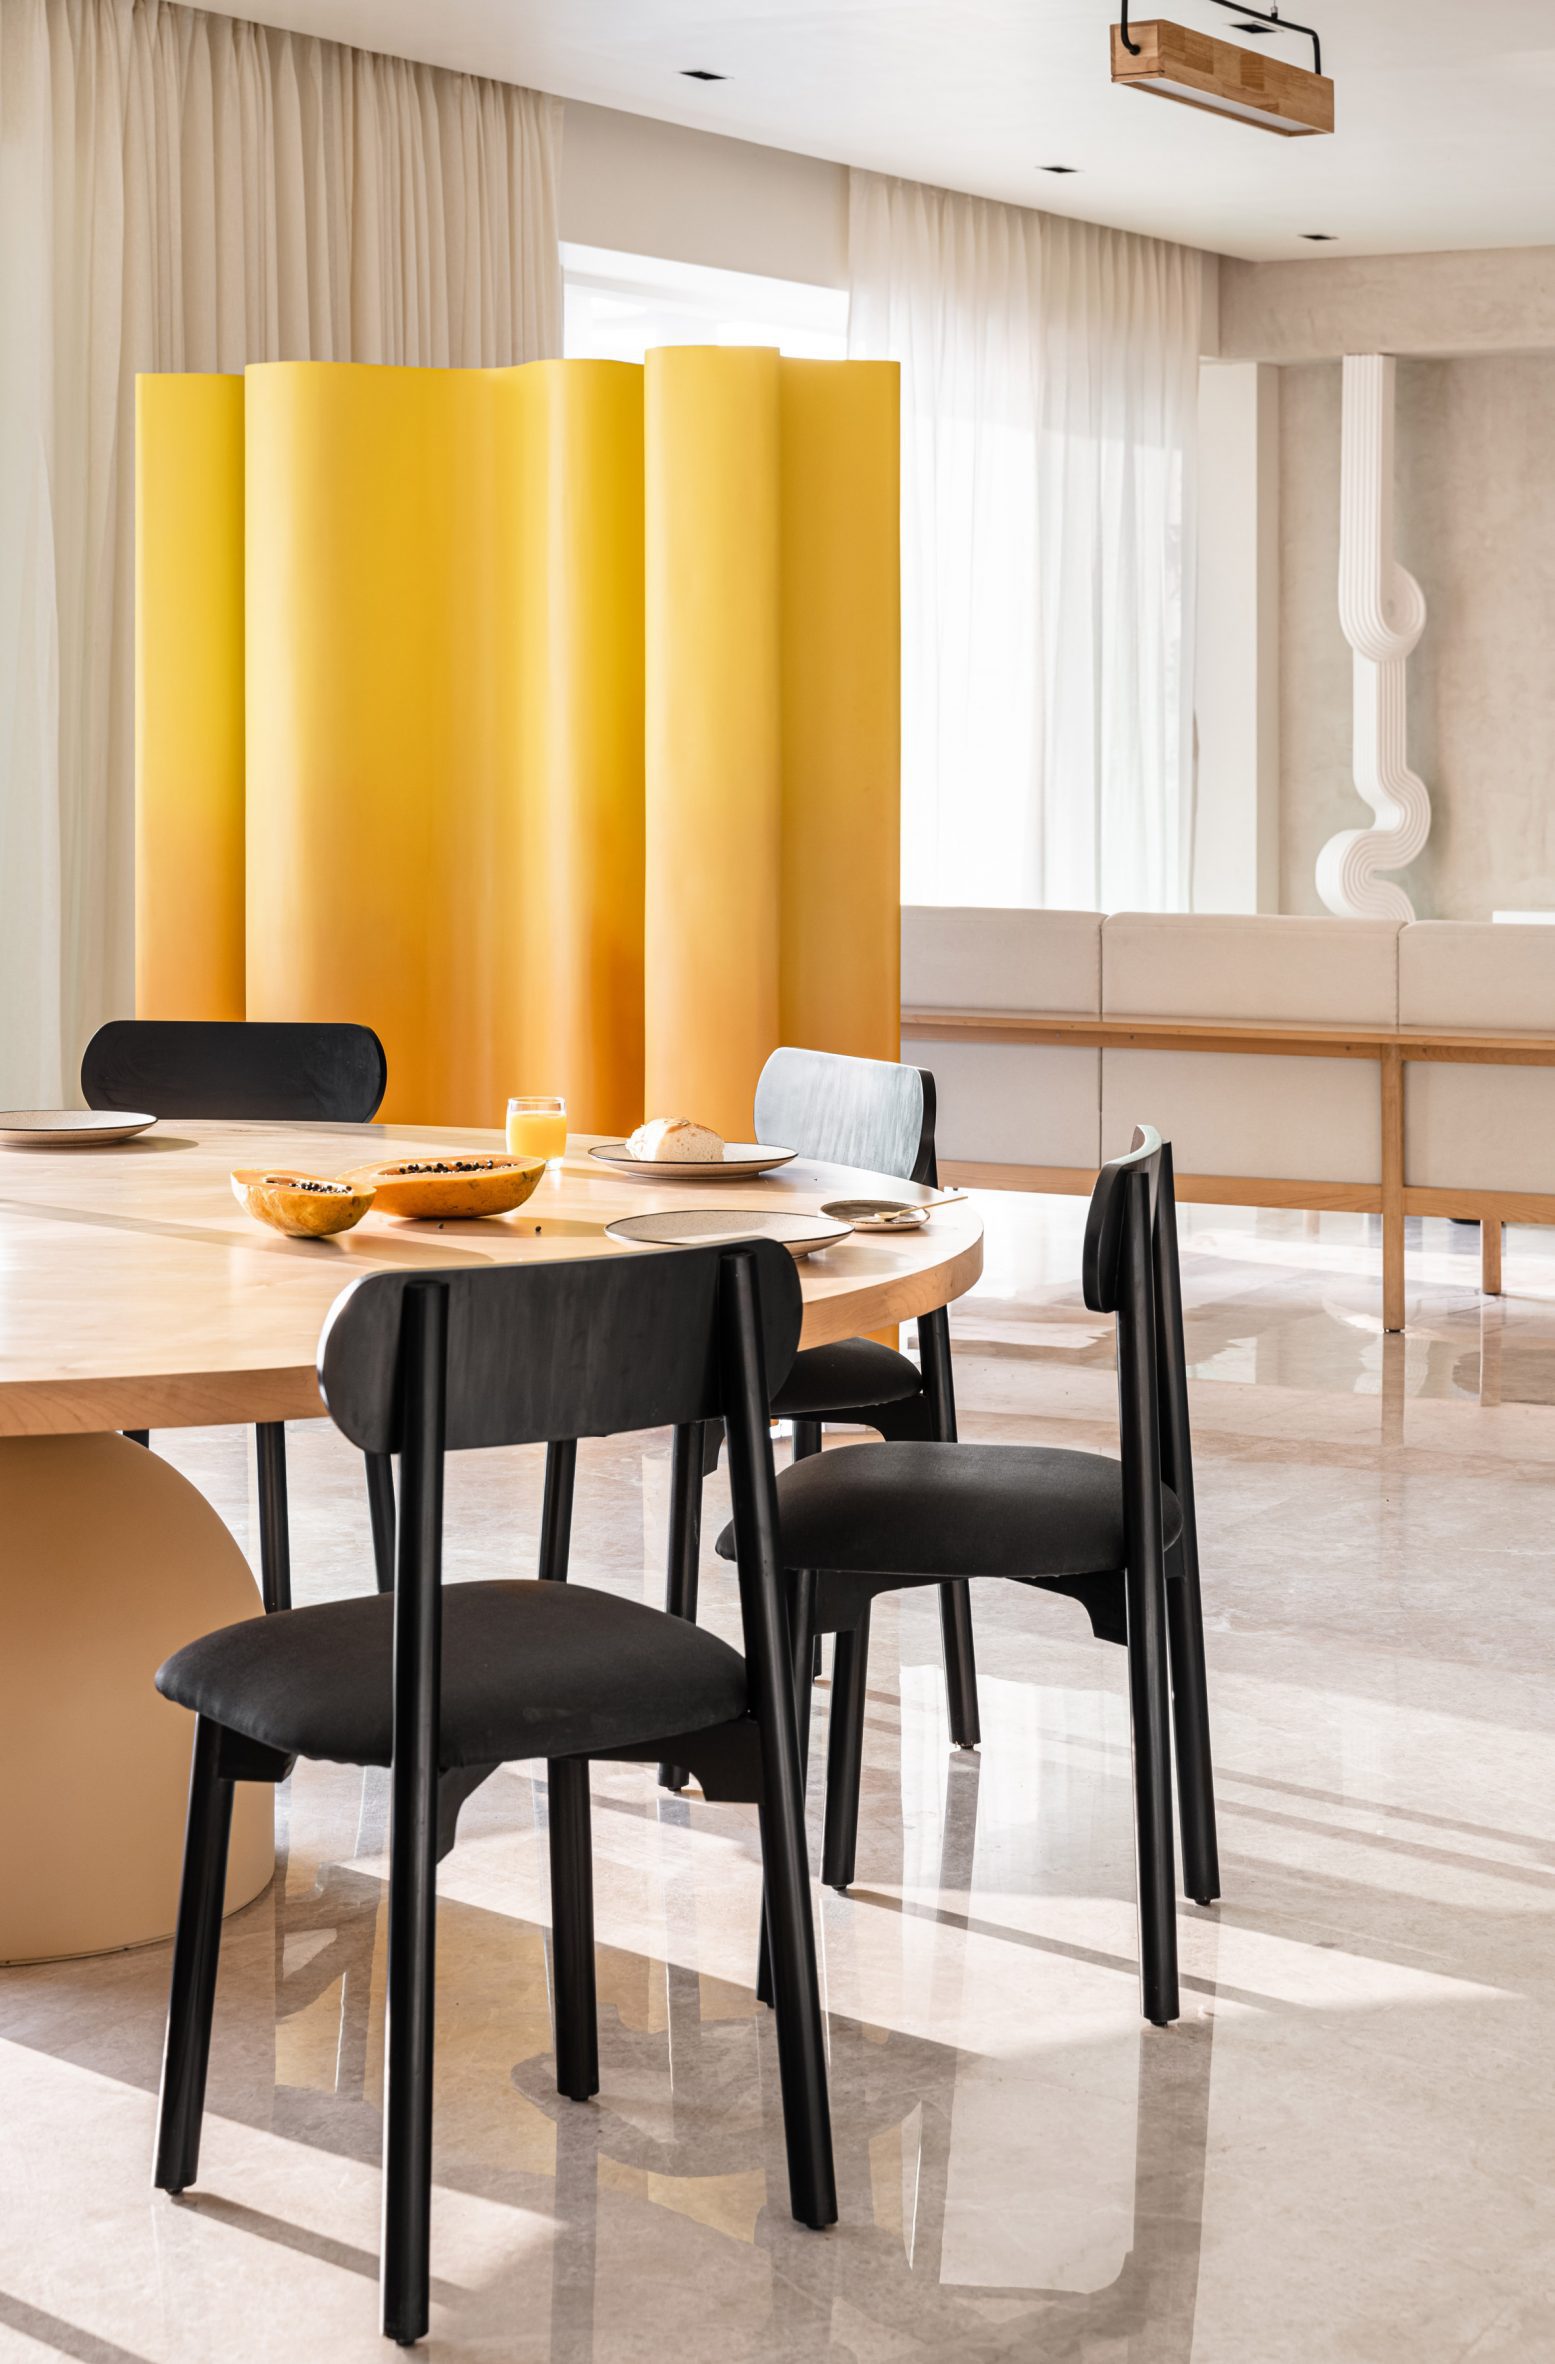 Dining room with wooden table, black chairs and wavy partition wall in yellow by The Act of Quad